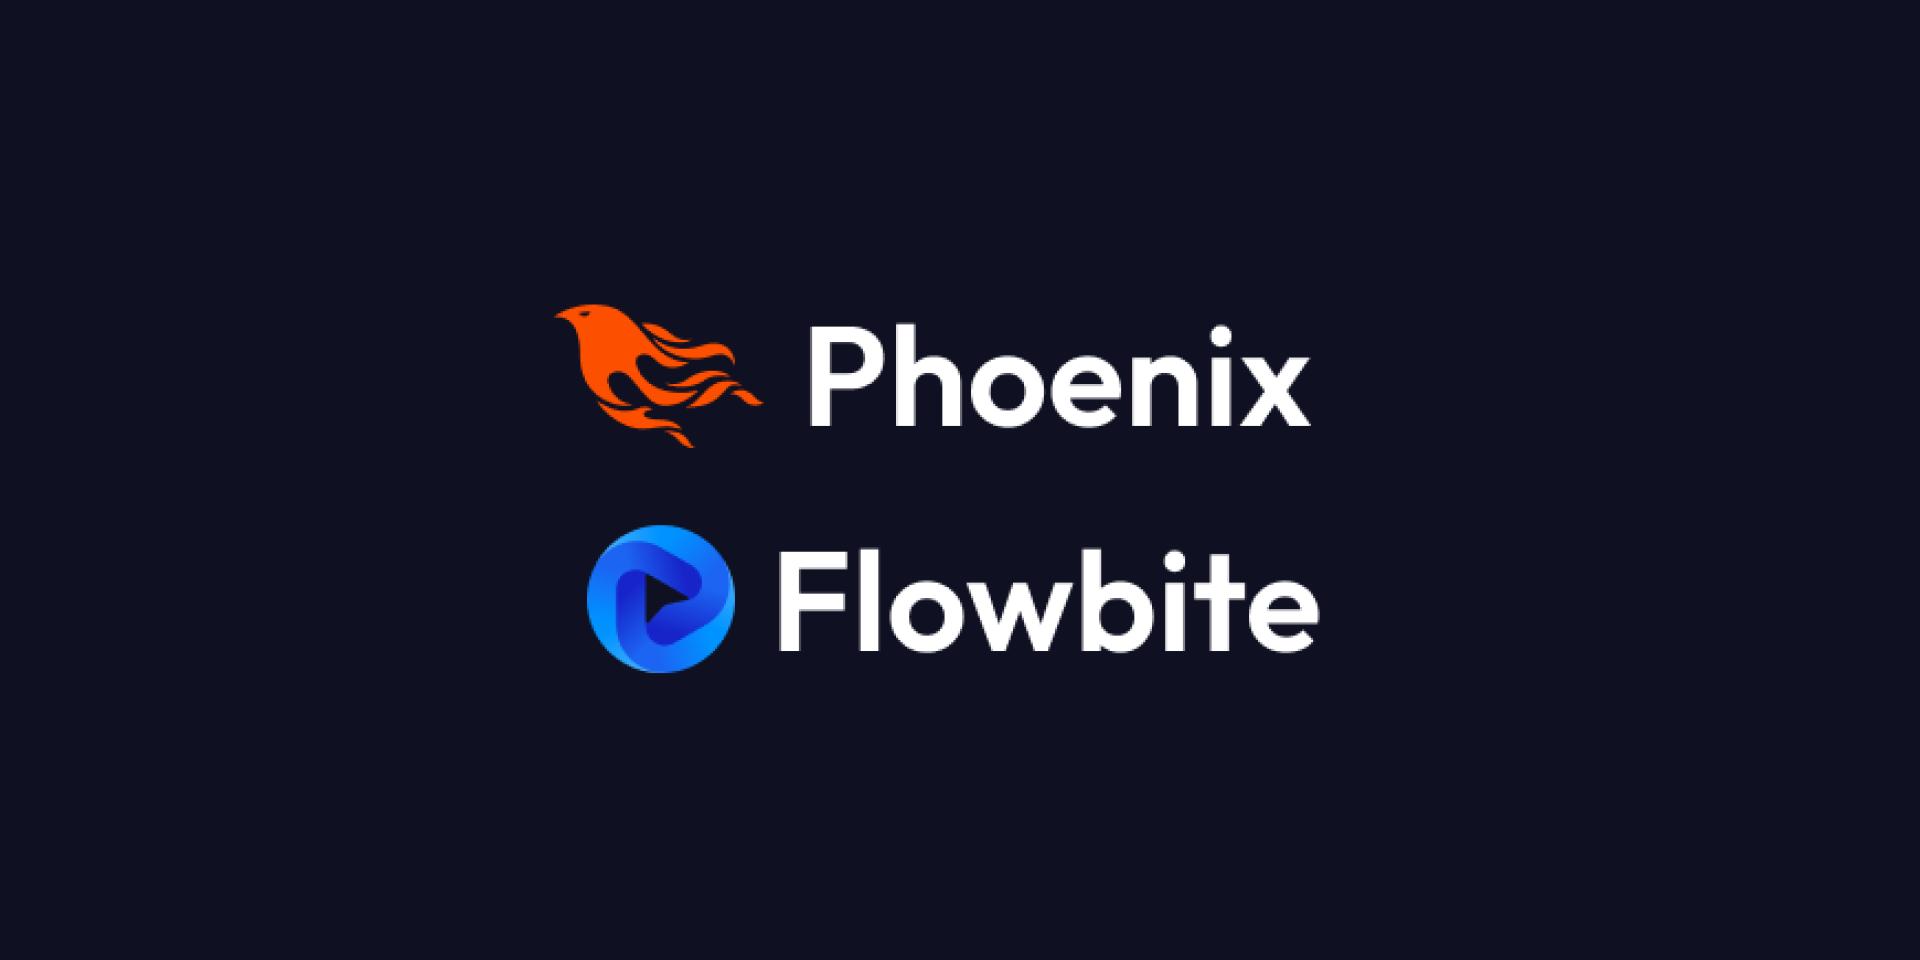 How to install Phoenix (Elixir) with Tailwind CSS and Flowbite